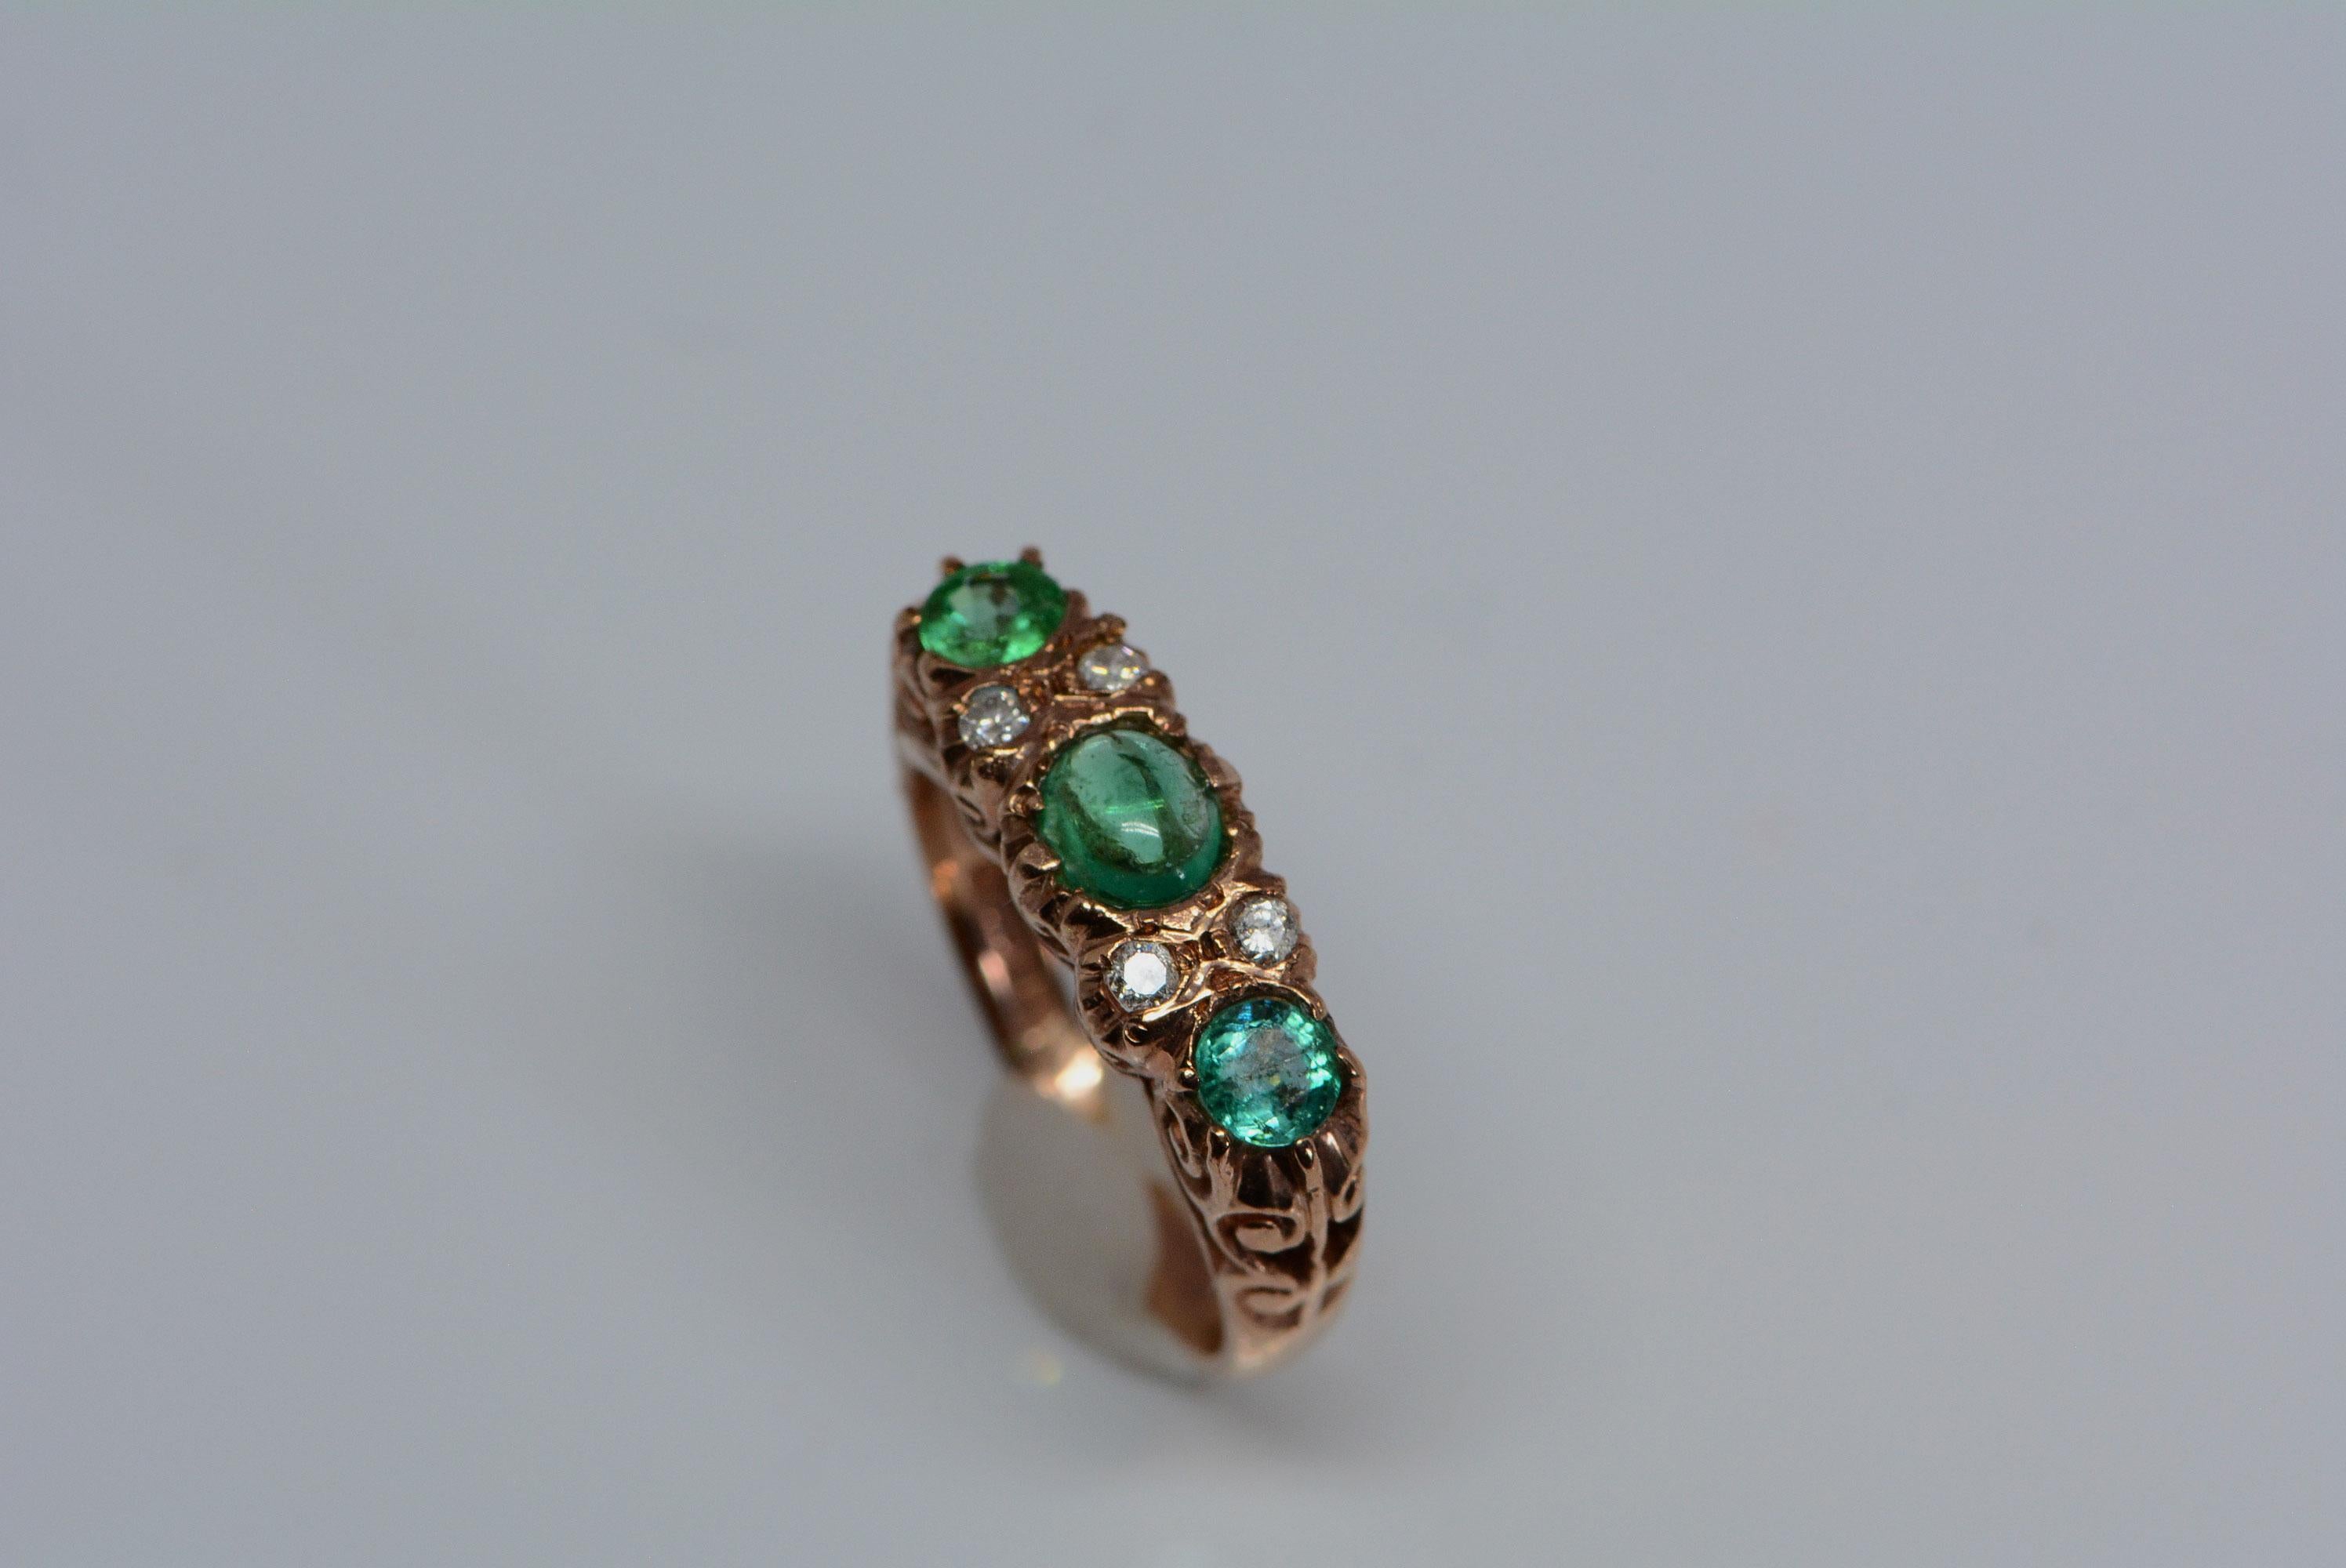 Victorian English Carved Half-Hoop Emerald And Diamond Ring 9 Karat Rose Gold In Excellent Condition For Sale In Aurora, Ontario